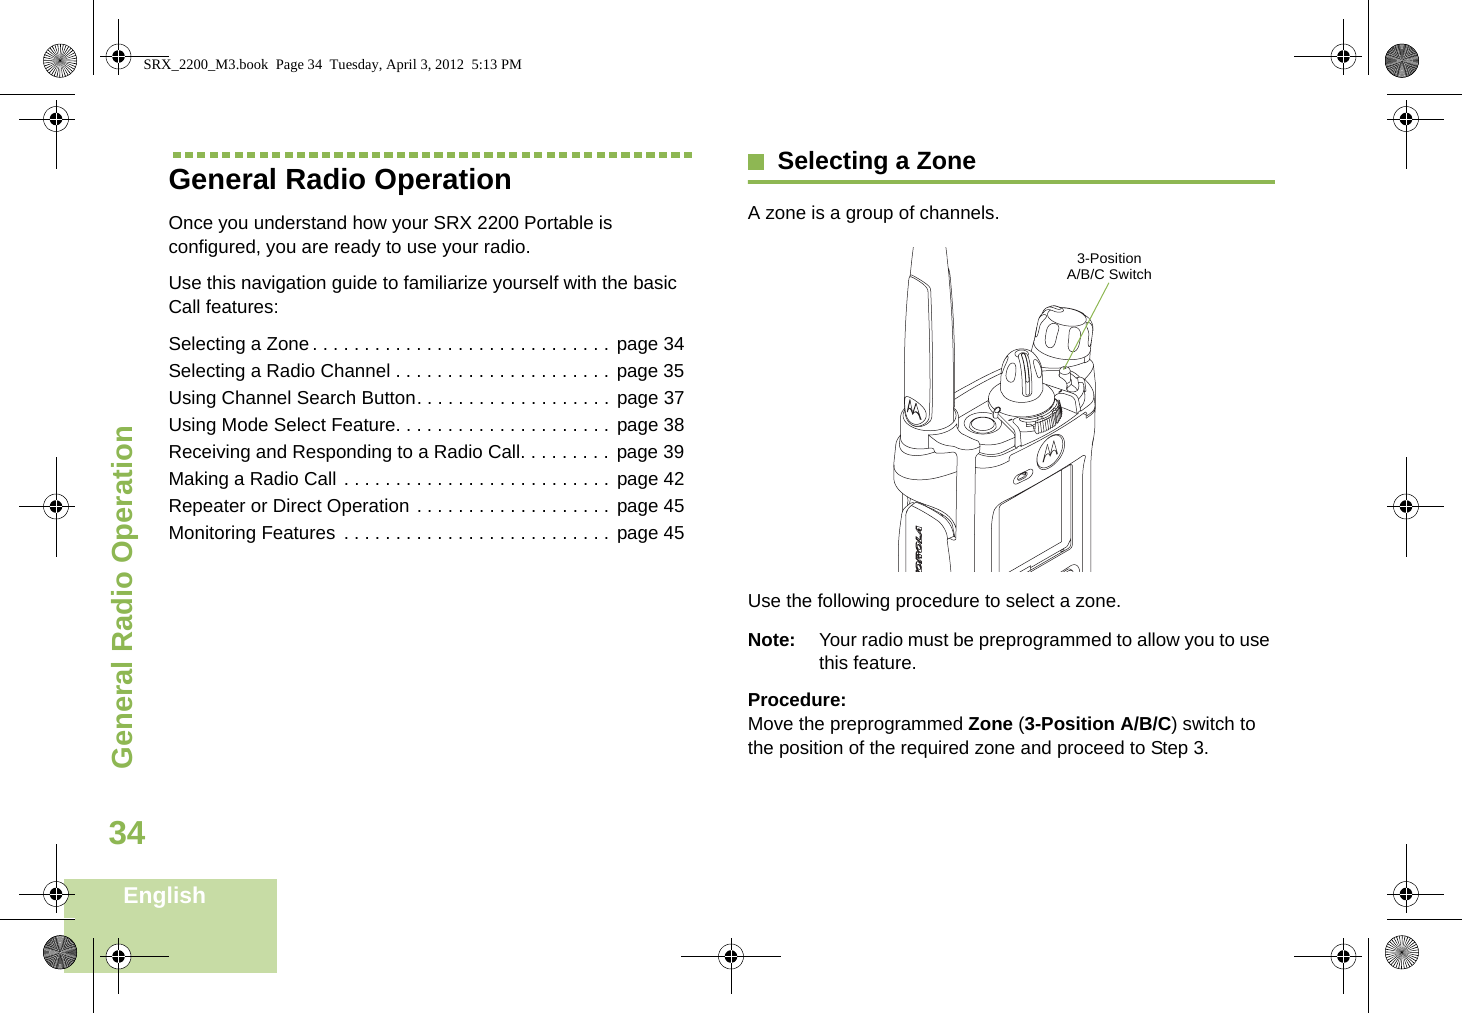 General Radio OperationEnglish34General Radio OperationOnce you understand how your SRX 2200 Portable is configured, you are ready to use your radio.Use this navigation guide to familiarize yourself with the basic Call features:Selecting a Zone. . . . . . . . . . . . . . . . . . . . . . . . . . . . . page 34Selecting a Radio Channel . . . . . . . . . . . . . . . . . . . . . page 35Using Channel Search Button. . . . . . . . . . . . . . . . . . . page 37Using Mode Select Feature. . . . . . . . . . . . . . . . . . . . .  page 38Receiving and Responding to a Radio Call. . . . . . . . . page 39Making a Radio Call . . . . . . . . . . . . . . . . . . . . . . . . . . page 42Repeater or Direct Operation . . . . . . . . . . . . . . . . . . . page 45Monitoring Features . . . . . . . . . . . . . . . . . . . . . . . . . . page 45Selecting a ZoneA zone is a group of channels. Use the following procedure to select a zone.Note: Your radio must be preprogrammed to allow you to use this feature.Procedure:Move the preprogrammed Zone (3-Position A/B/C) switch to the position of the required zone and proceed to Step 3. 3-Position A/B/C SwitchSRX_2200_M3.book  Page 34  Tuesday, April 3, 2012  5:13 PM